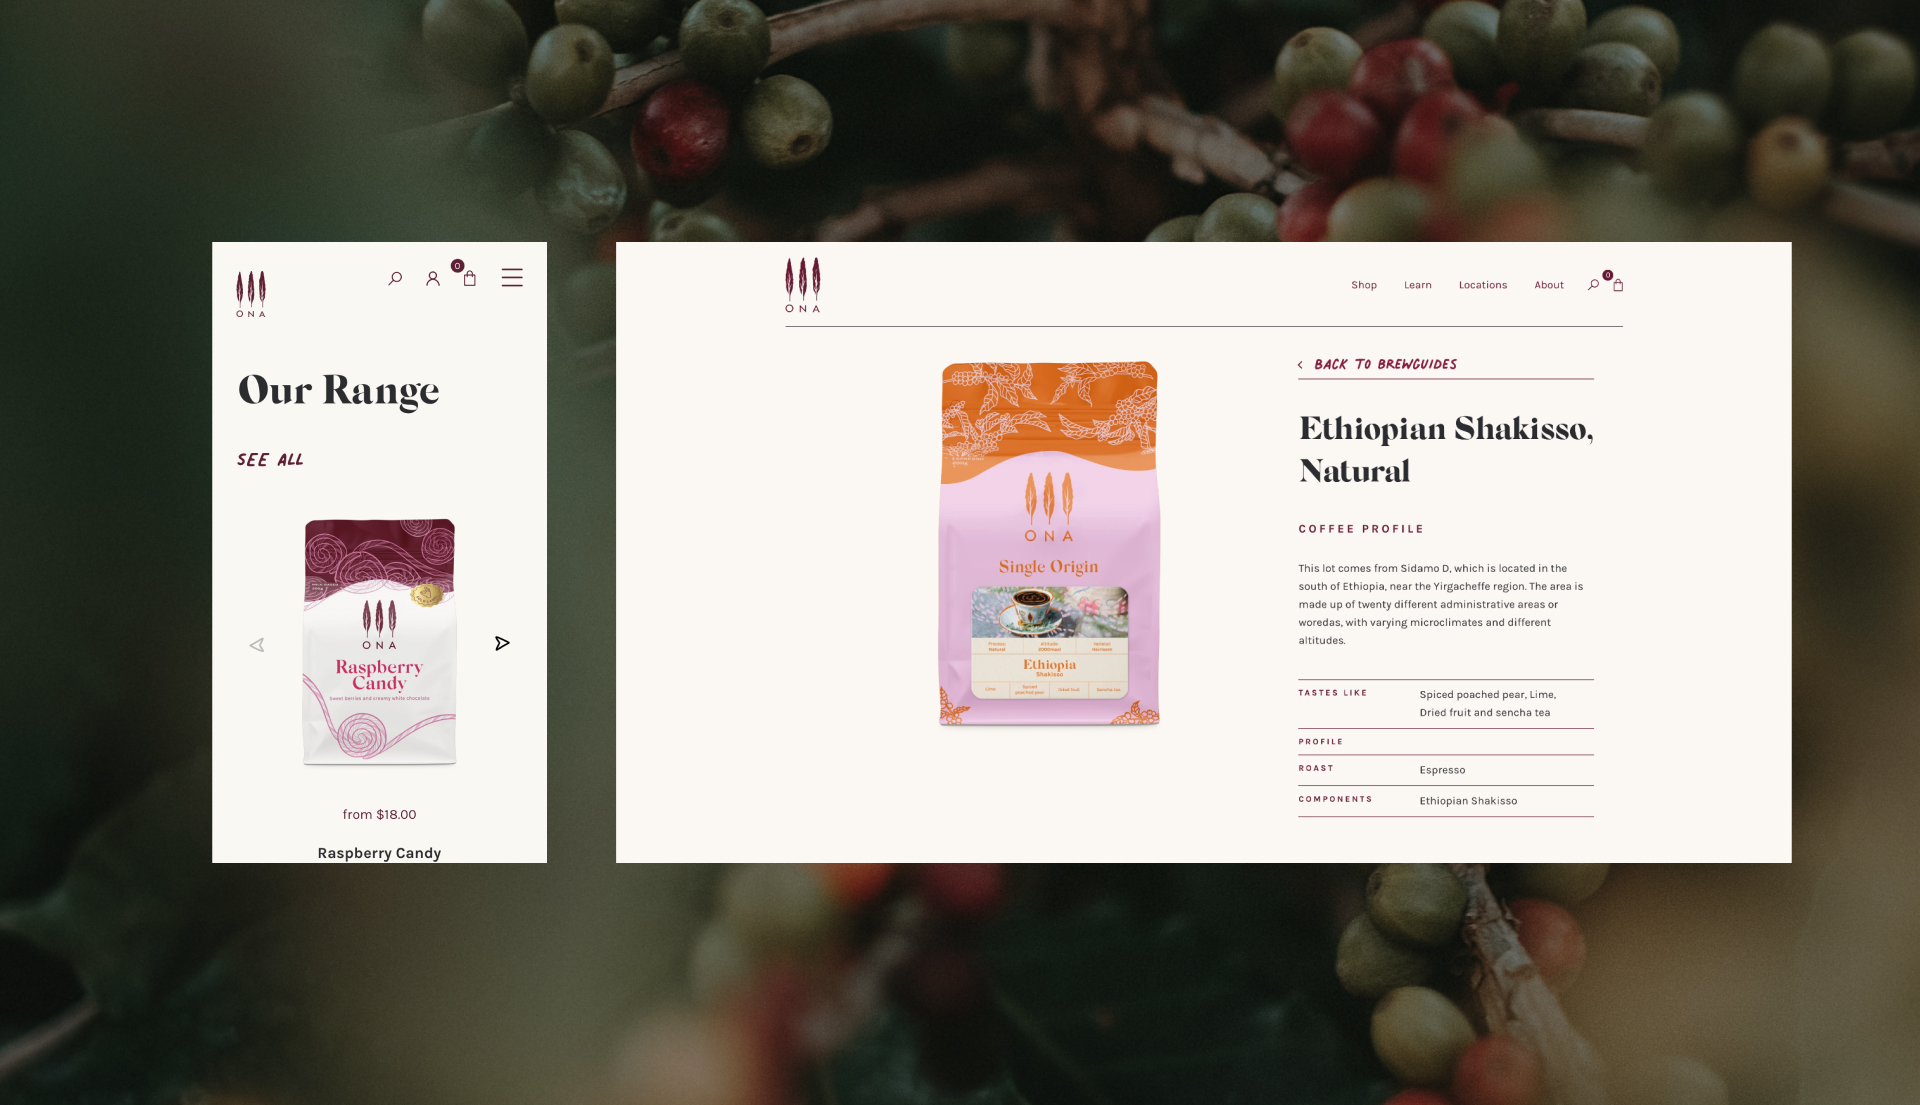 Ona website designs in mobile and desktop format on a background image of coffee beans.